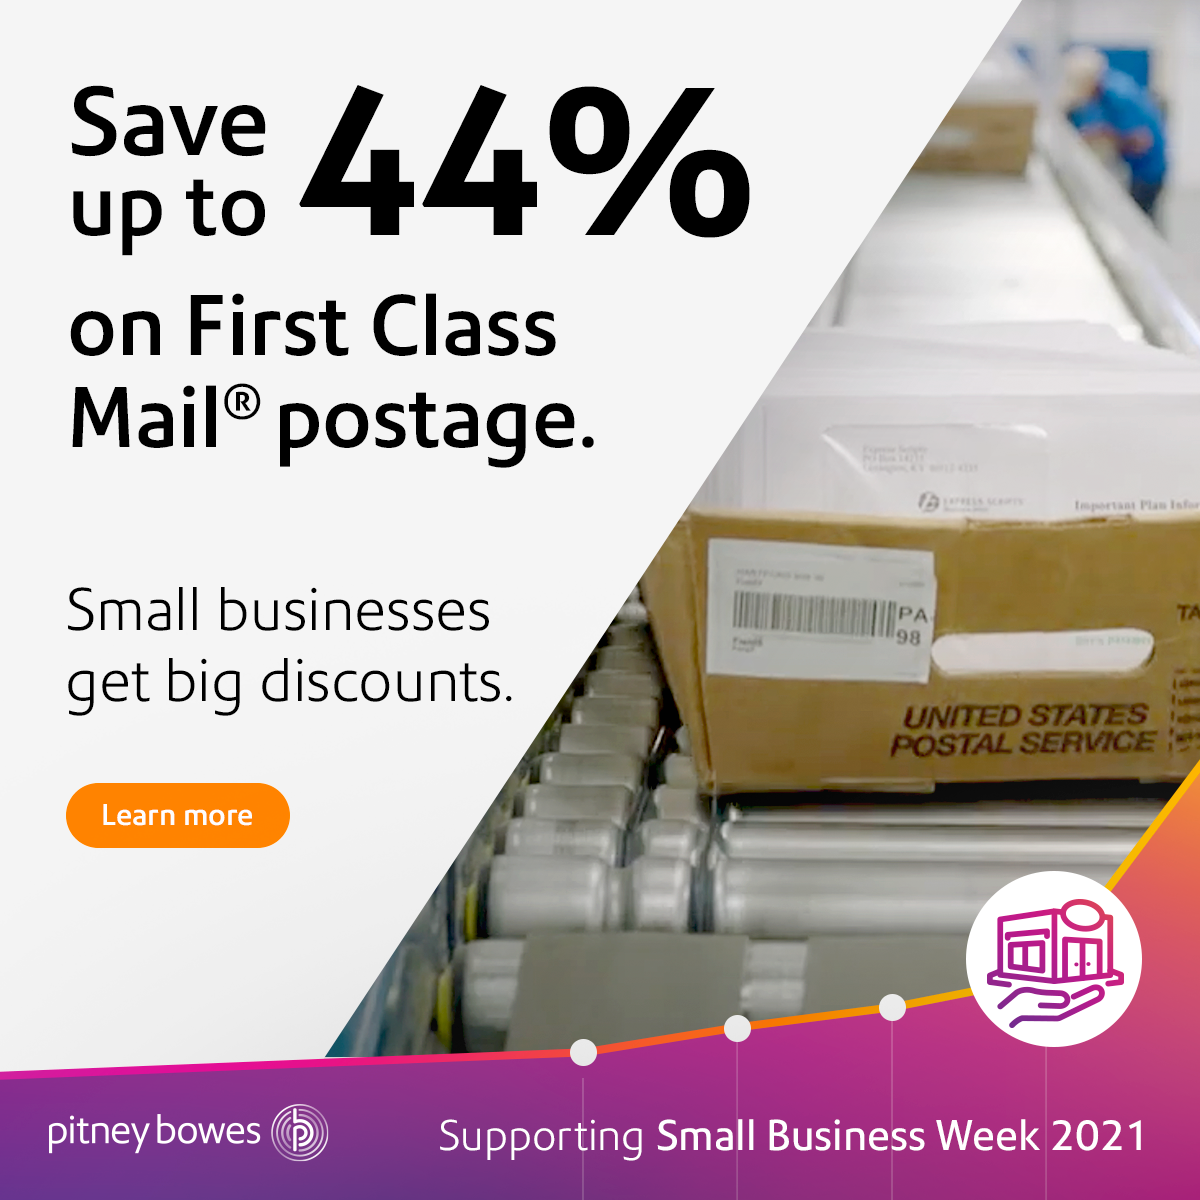 Small Business Week marketing campaign for Pitney Bowes - Joseph Ehlinger copywriter